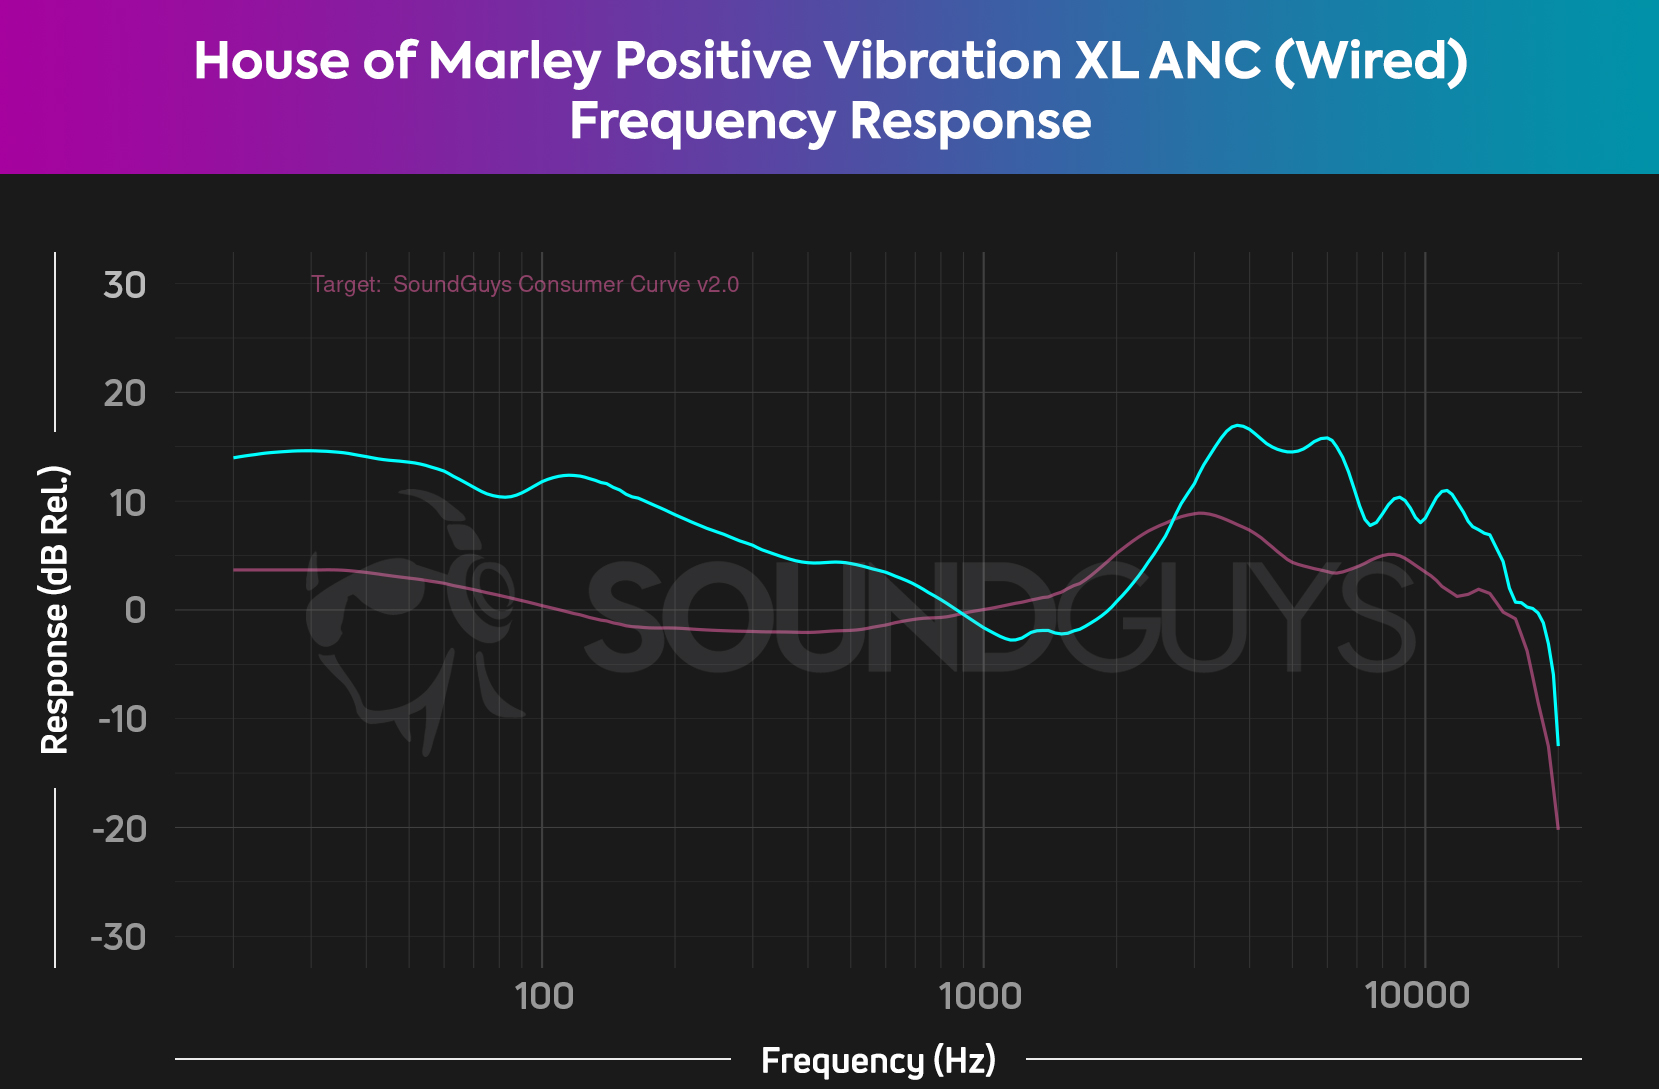 Chart represents the frequency response of the House of Marley Positive Vibration XL ANC when hard wired as compared to our ideal chart.